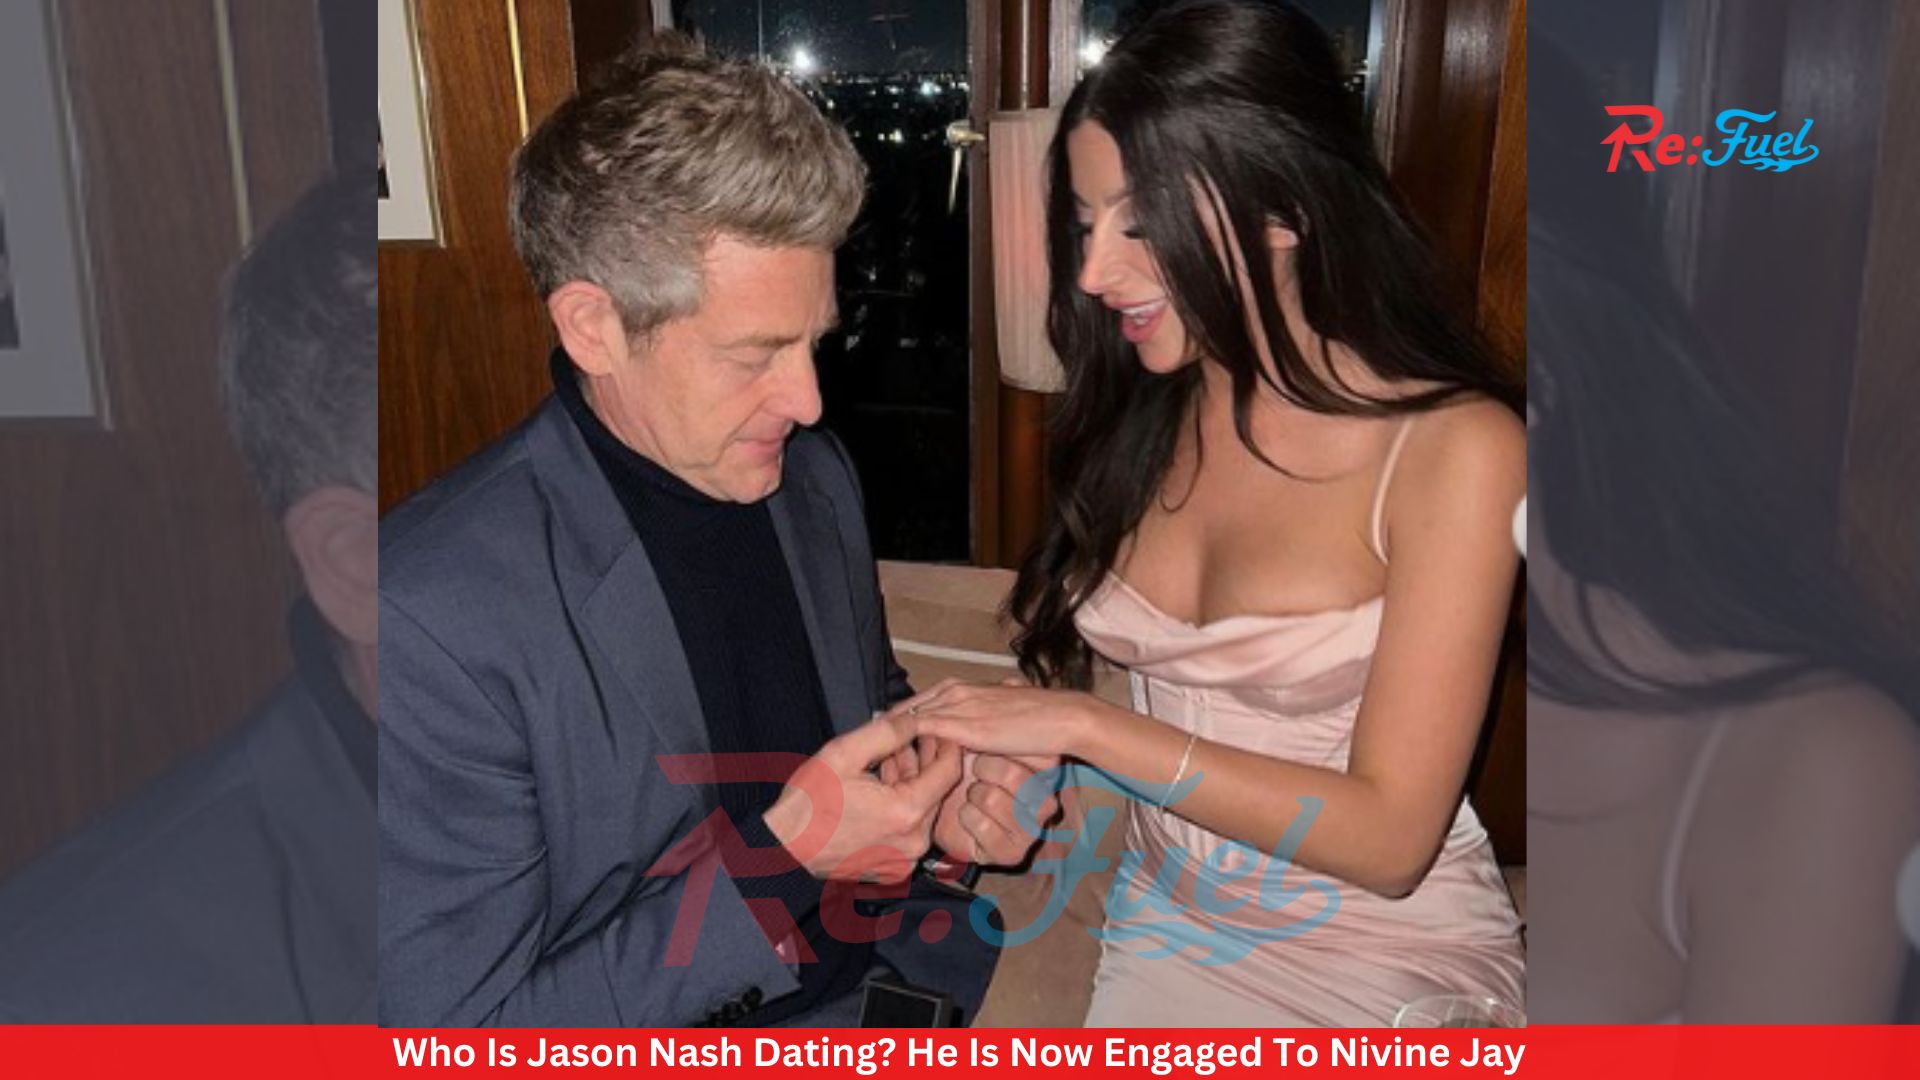 Who Is Jason Nash Dating? He Is Now Engaged To Nivine Jay